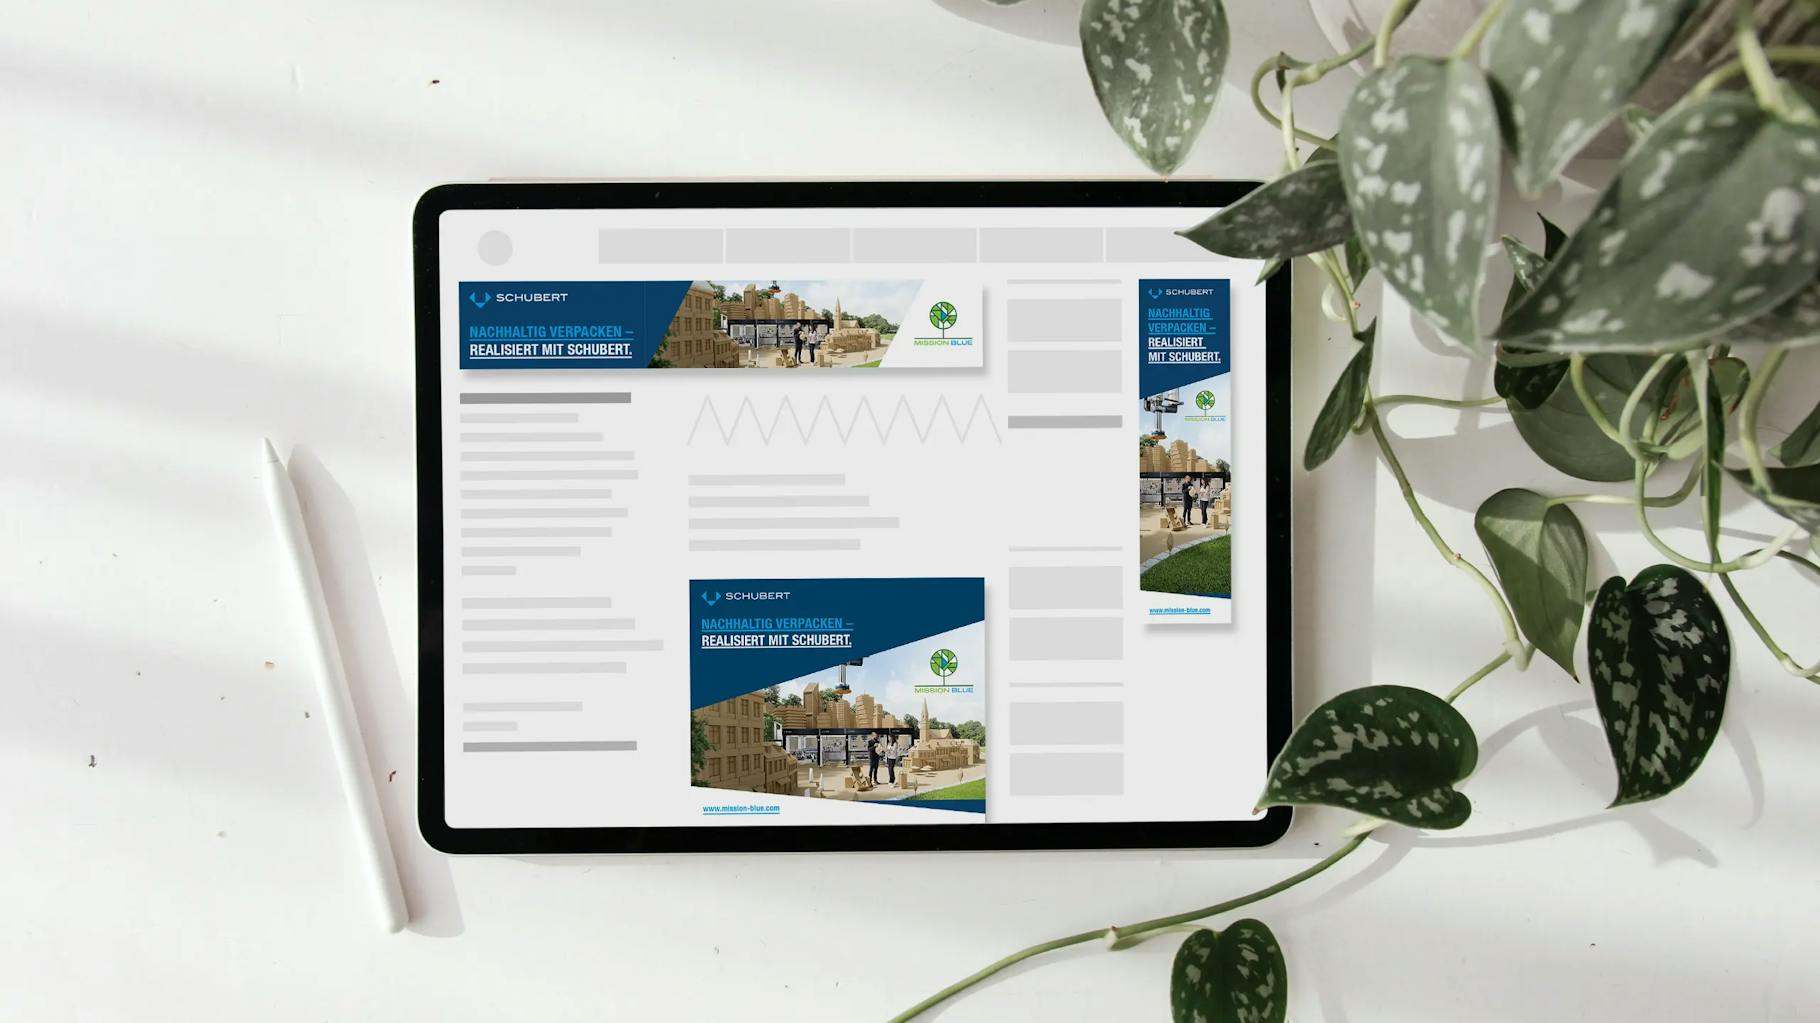 TopShot showing the advertising campaign for the Schubert company on an Ipad, which was created and realised by the B2B advertising agency Ruess Group